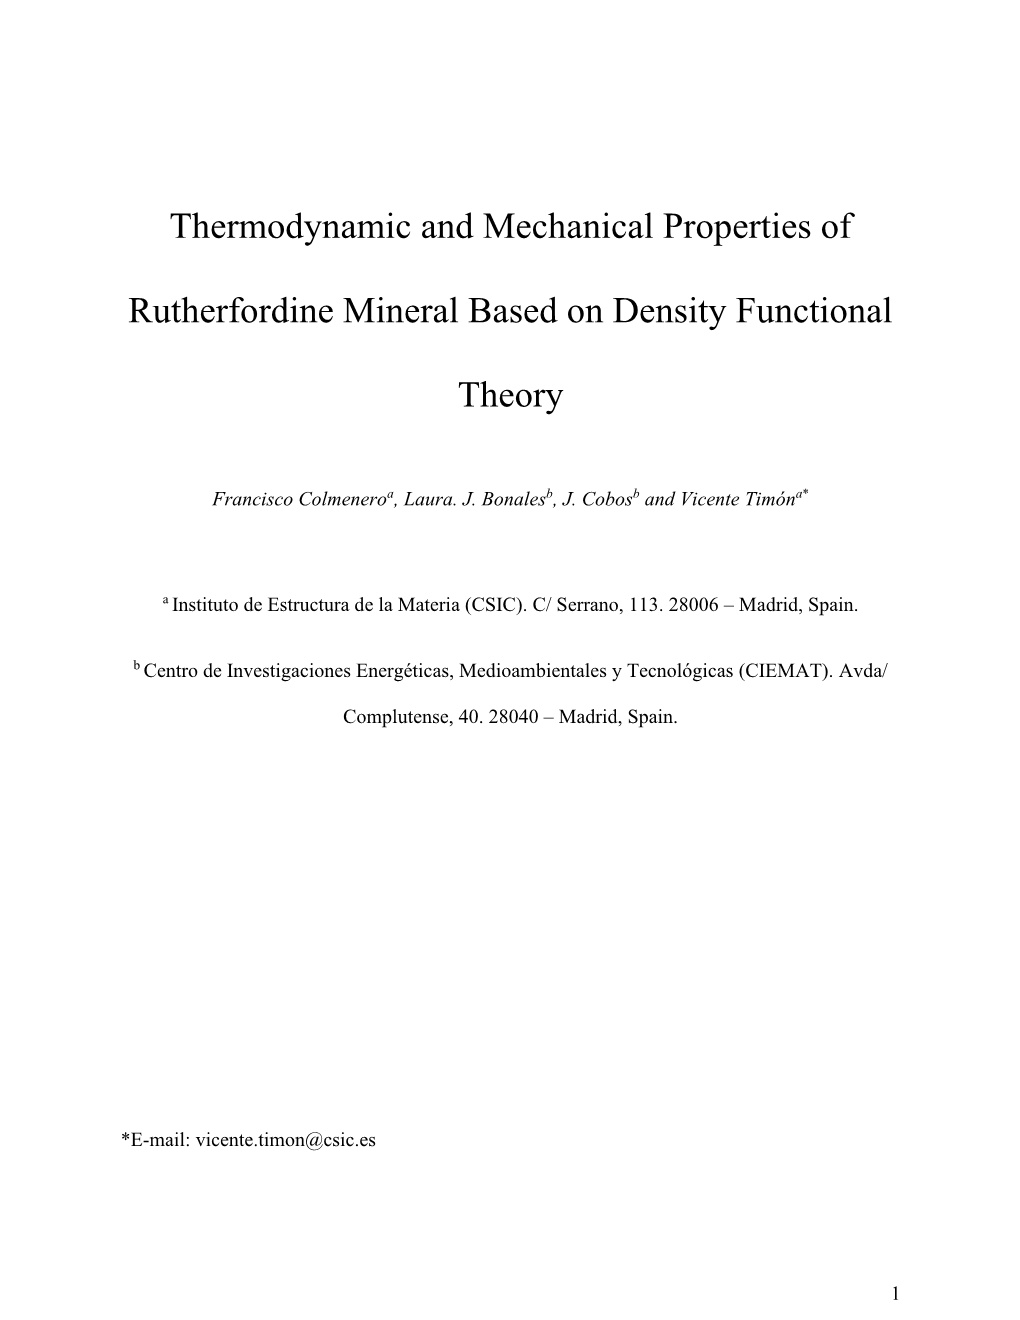 Thermodynamic and Mechanical Properties of Rutherfordine Mineral Were Studied by Means of First Principle Calculations Based on Density Functional Theory